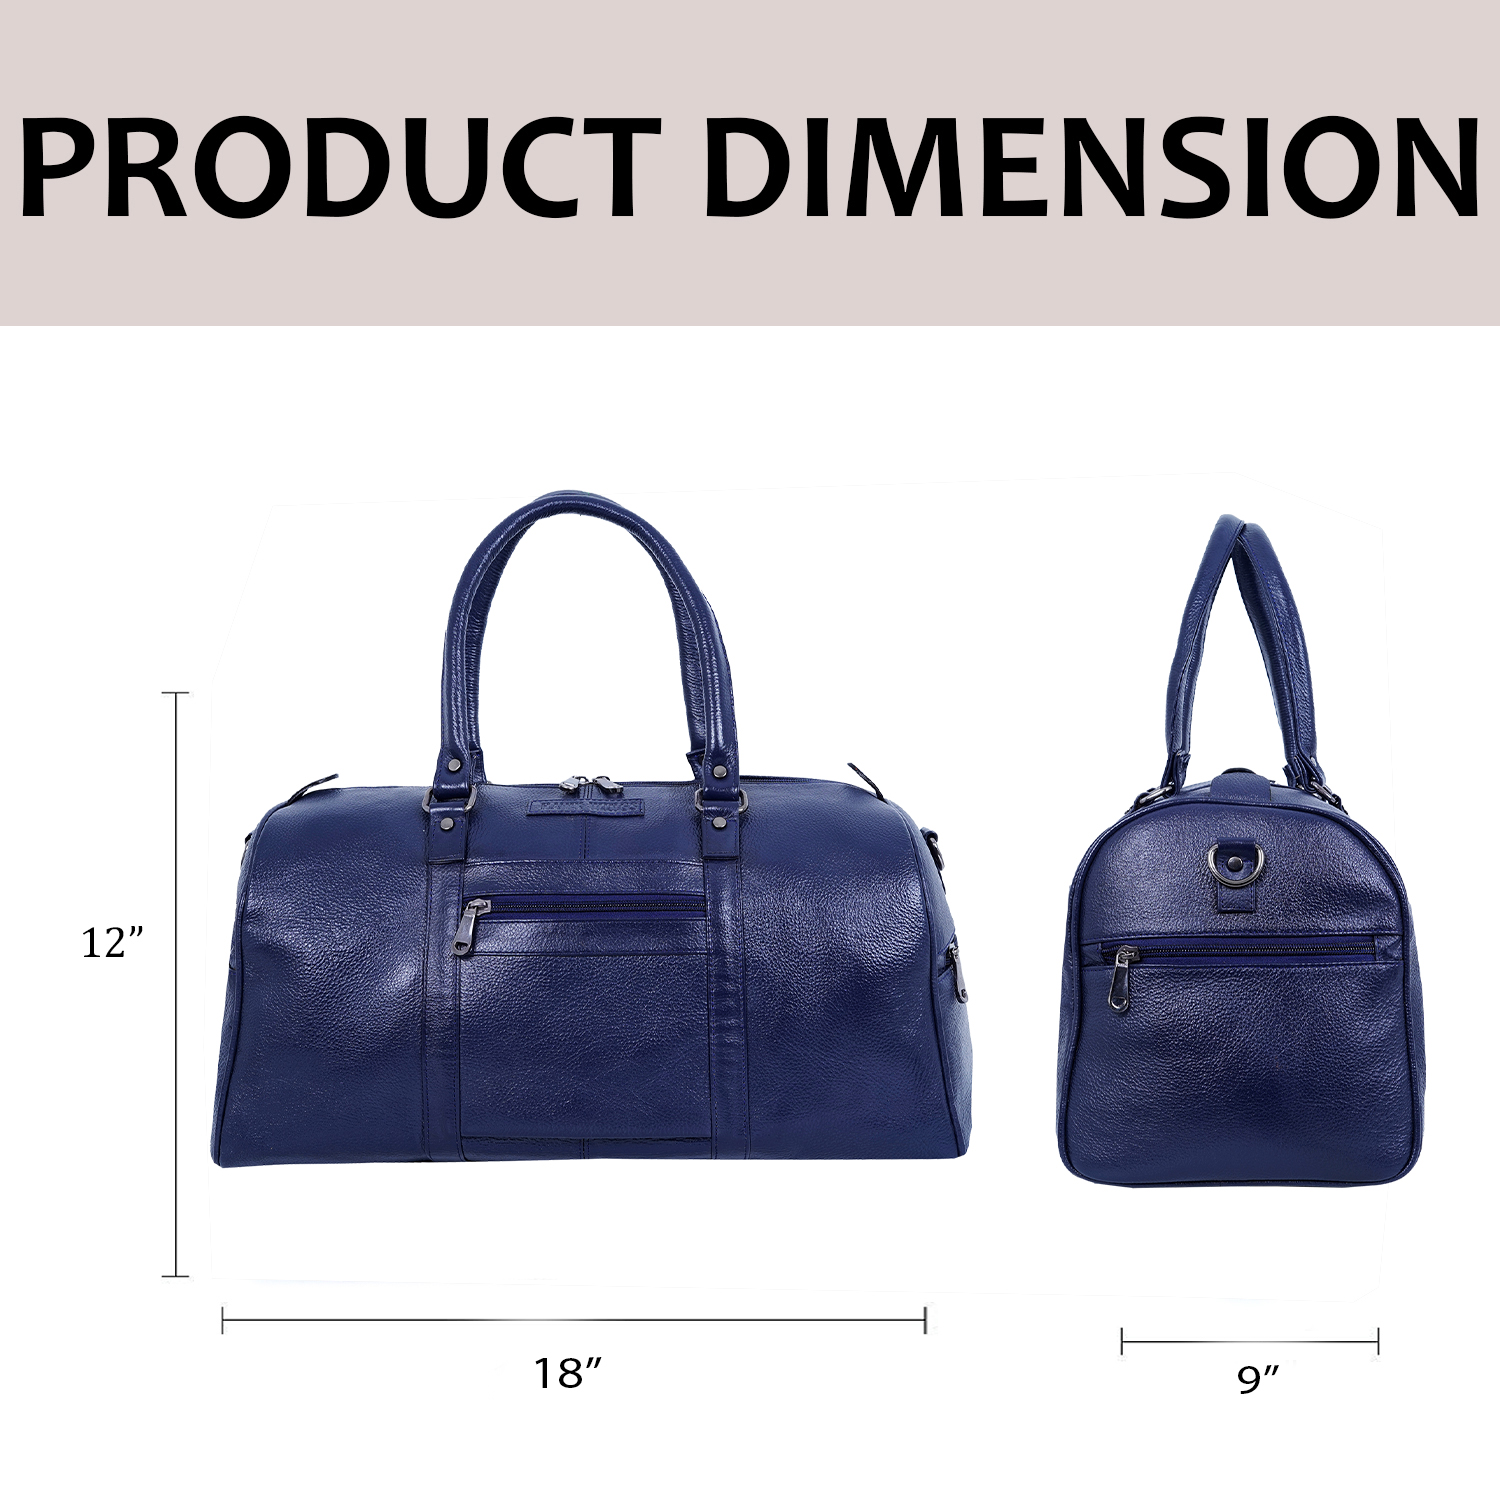  Leather Travel Duffle Bag for Men Women - Leather Duffel Carry on Overnight Weekender Bags (Blue)